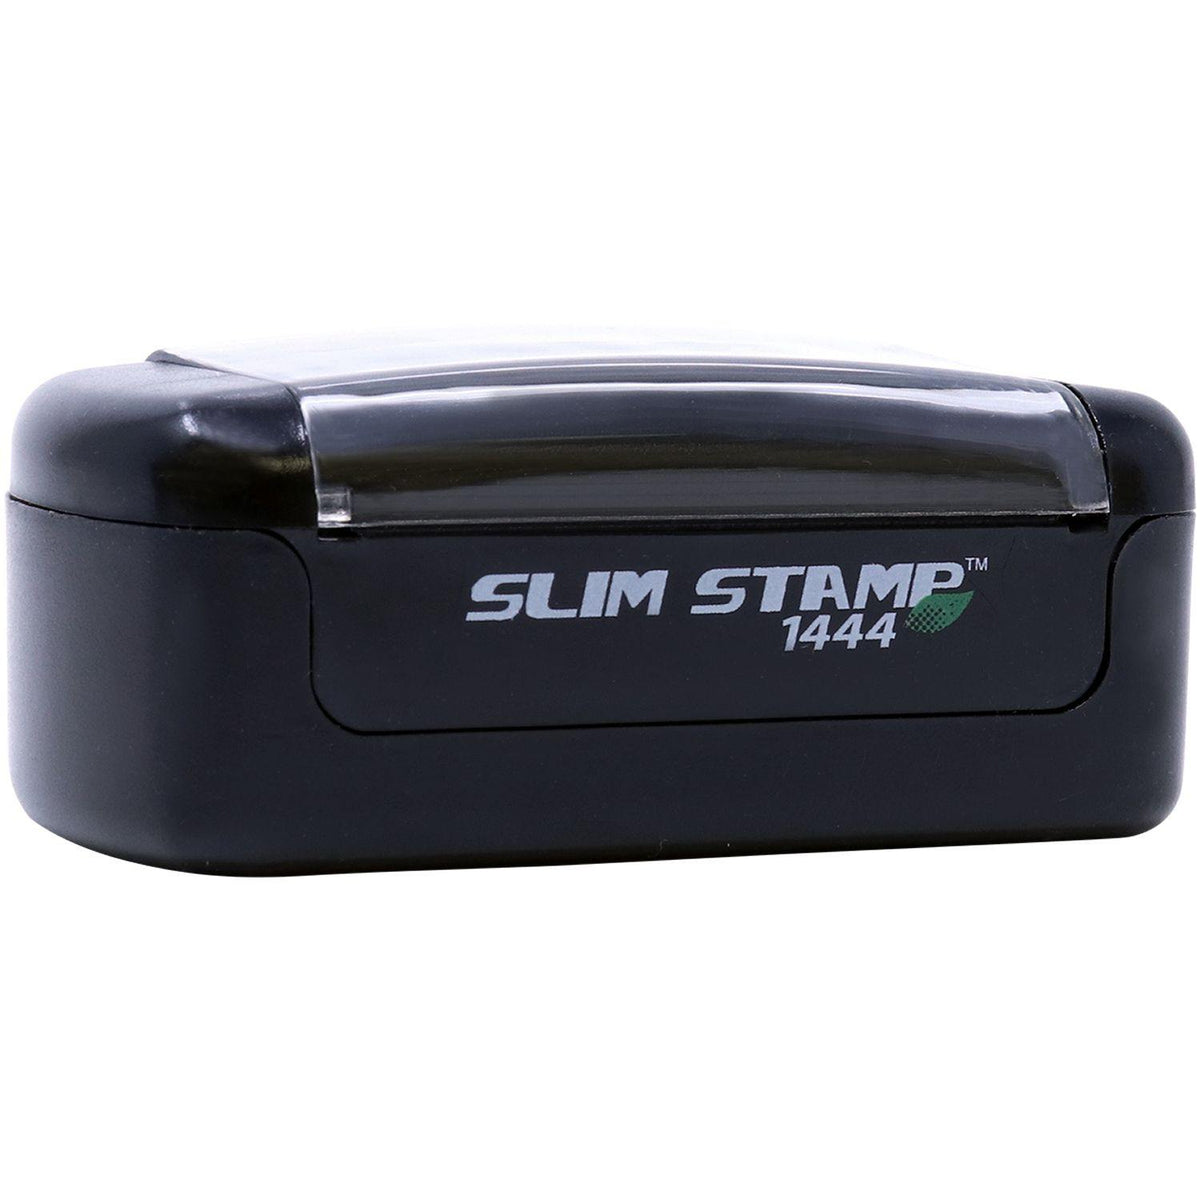 Slim Pre-Inked Cancelado Stamp - Engineer Seal Stamps - Brand_Slim, Impression Size_Small, Stamp Type_Pre-Inked Stamp, Type of Use_General, Type of Use_Office